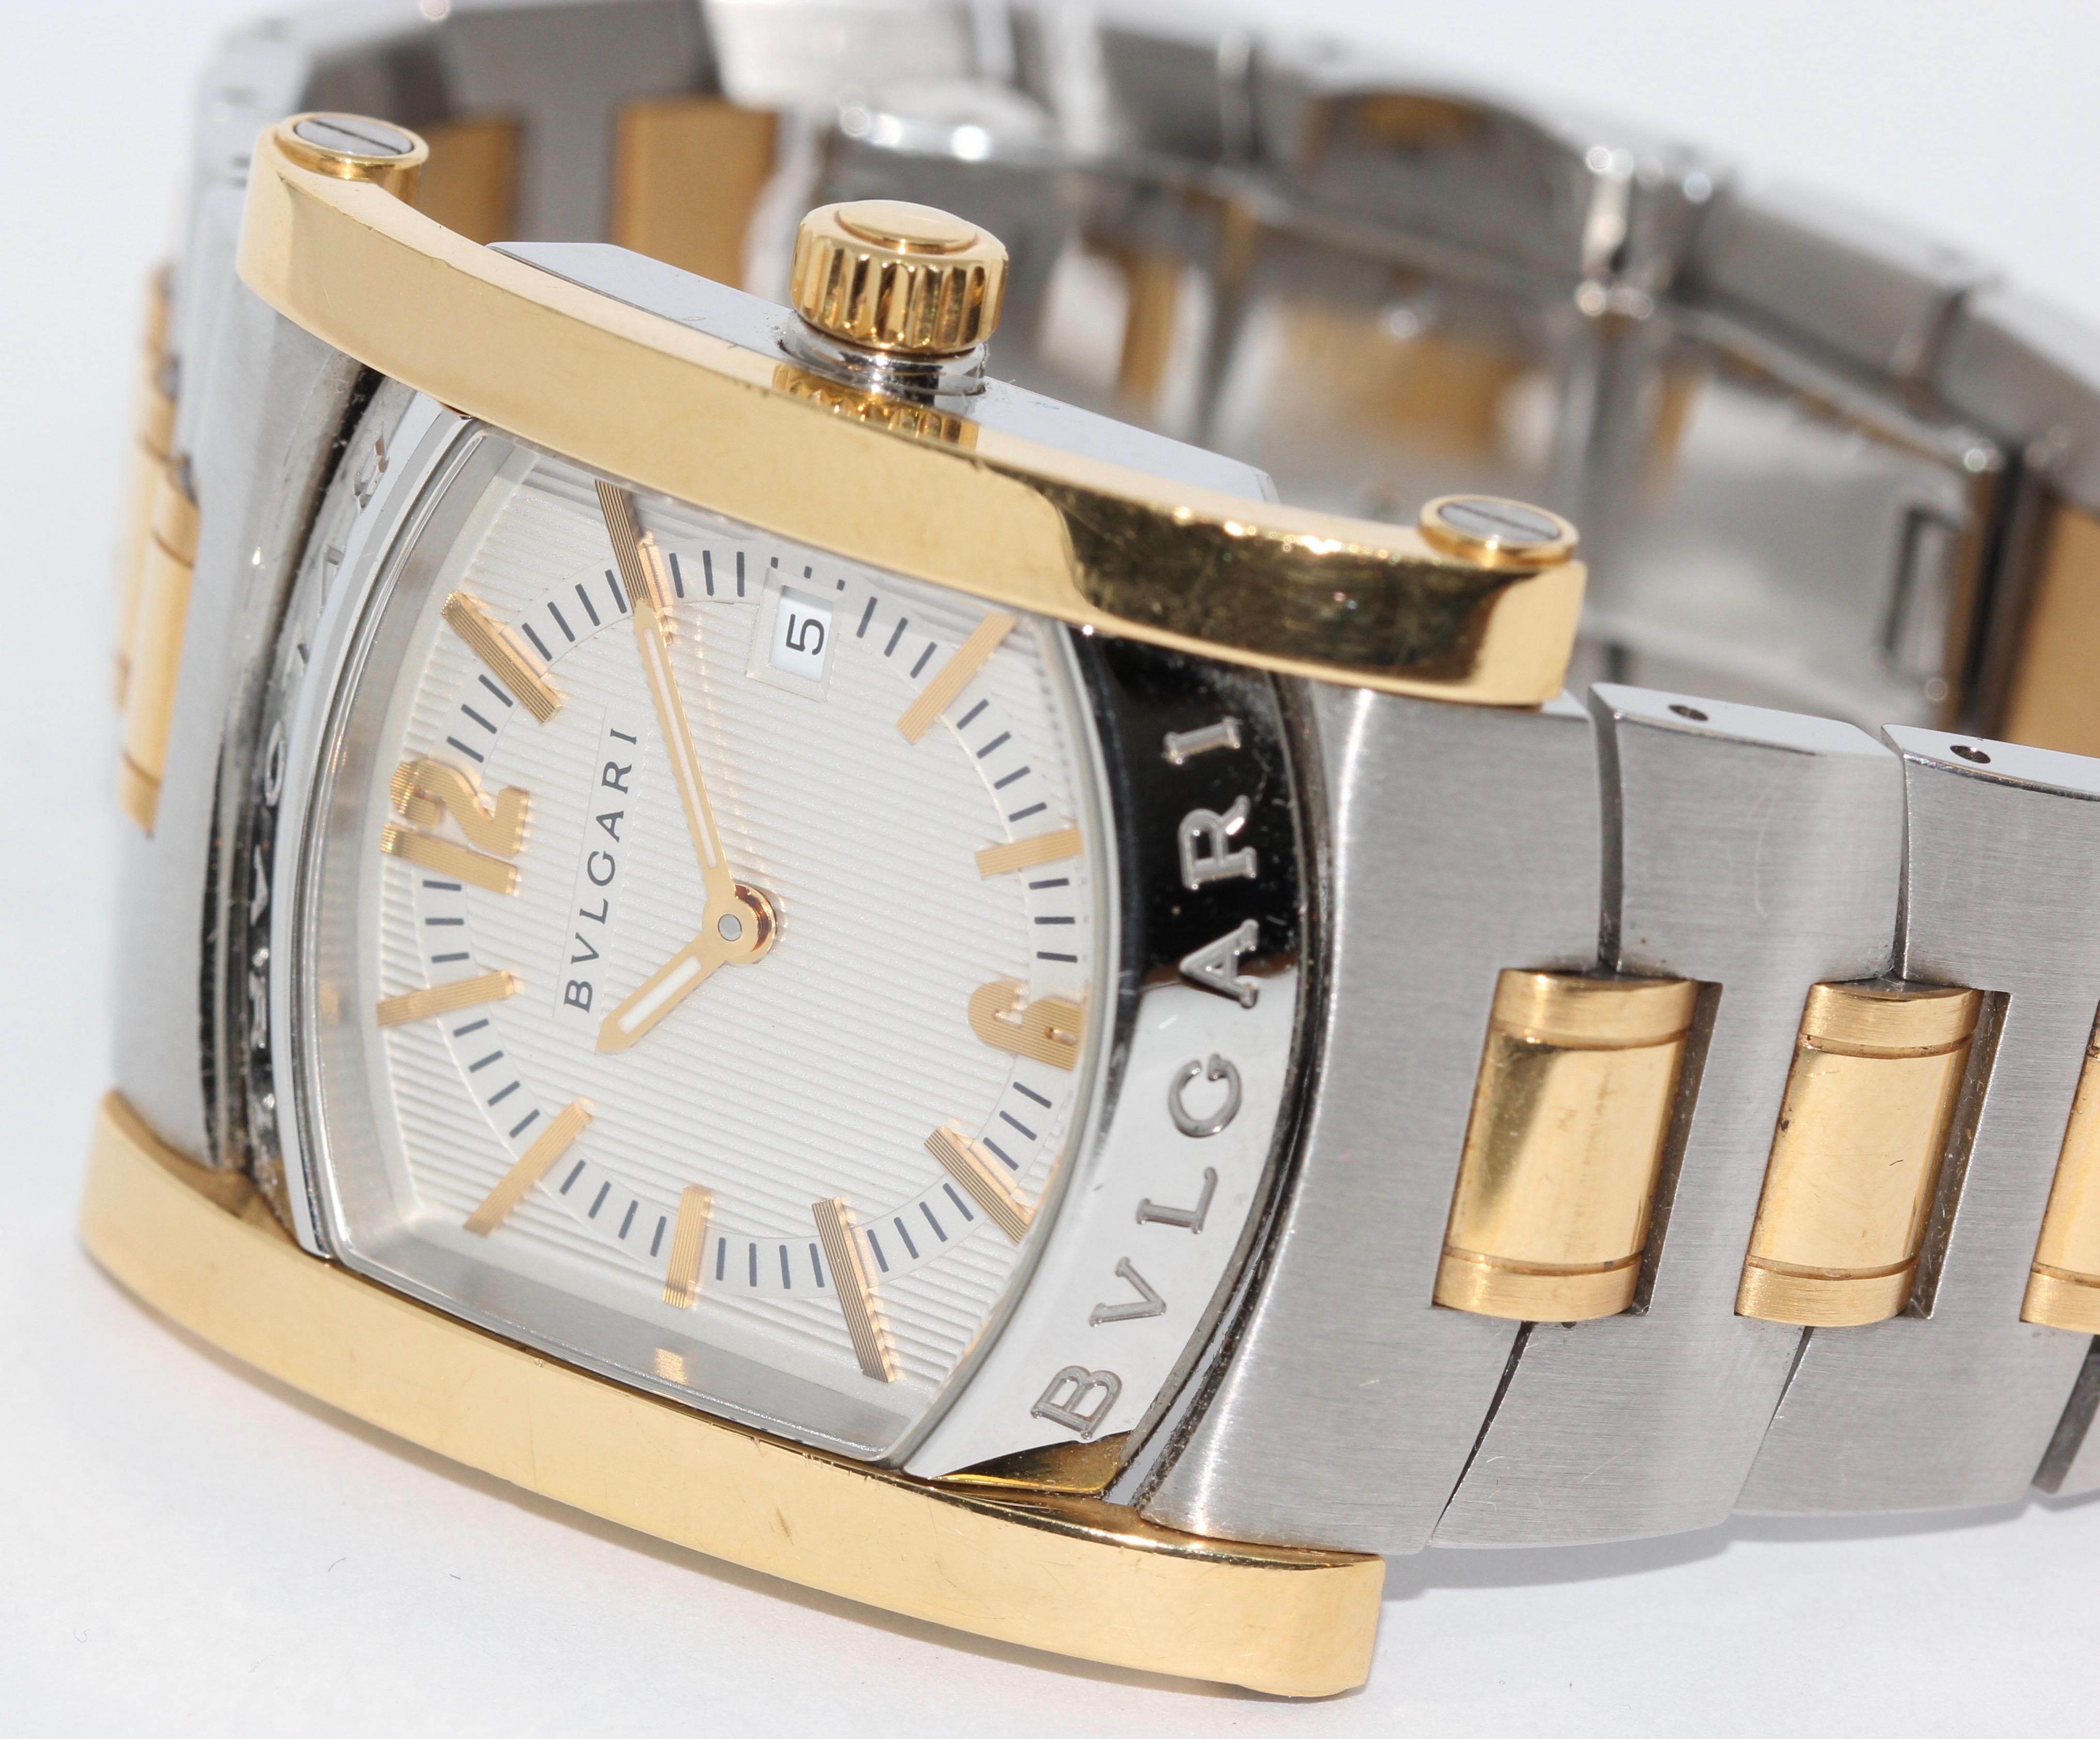 Bulgari Bvlgari Assioma Ladies Wrist Watch Steel and 18 Karat Gold. Ref. AA39SG.

Quartz movement.

Including original box and papers.

The watch receives a new battery change before shipping.